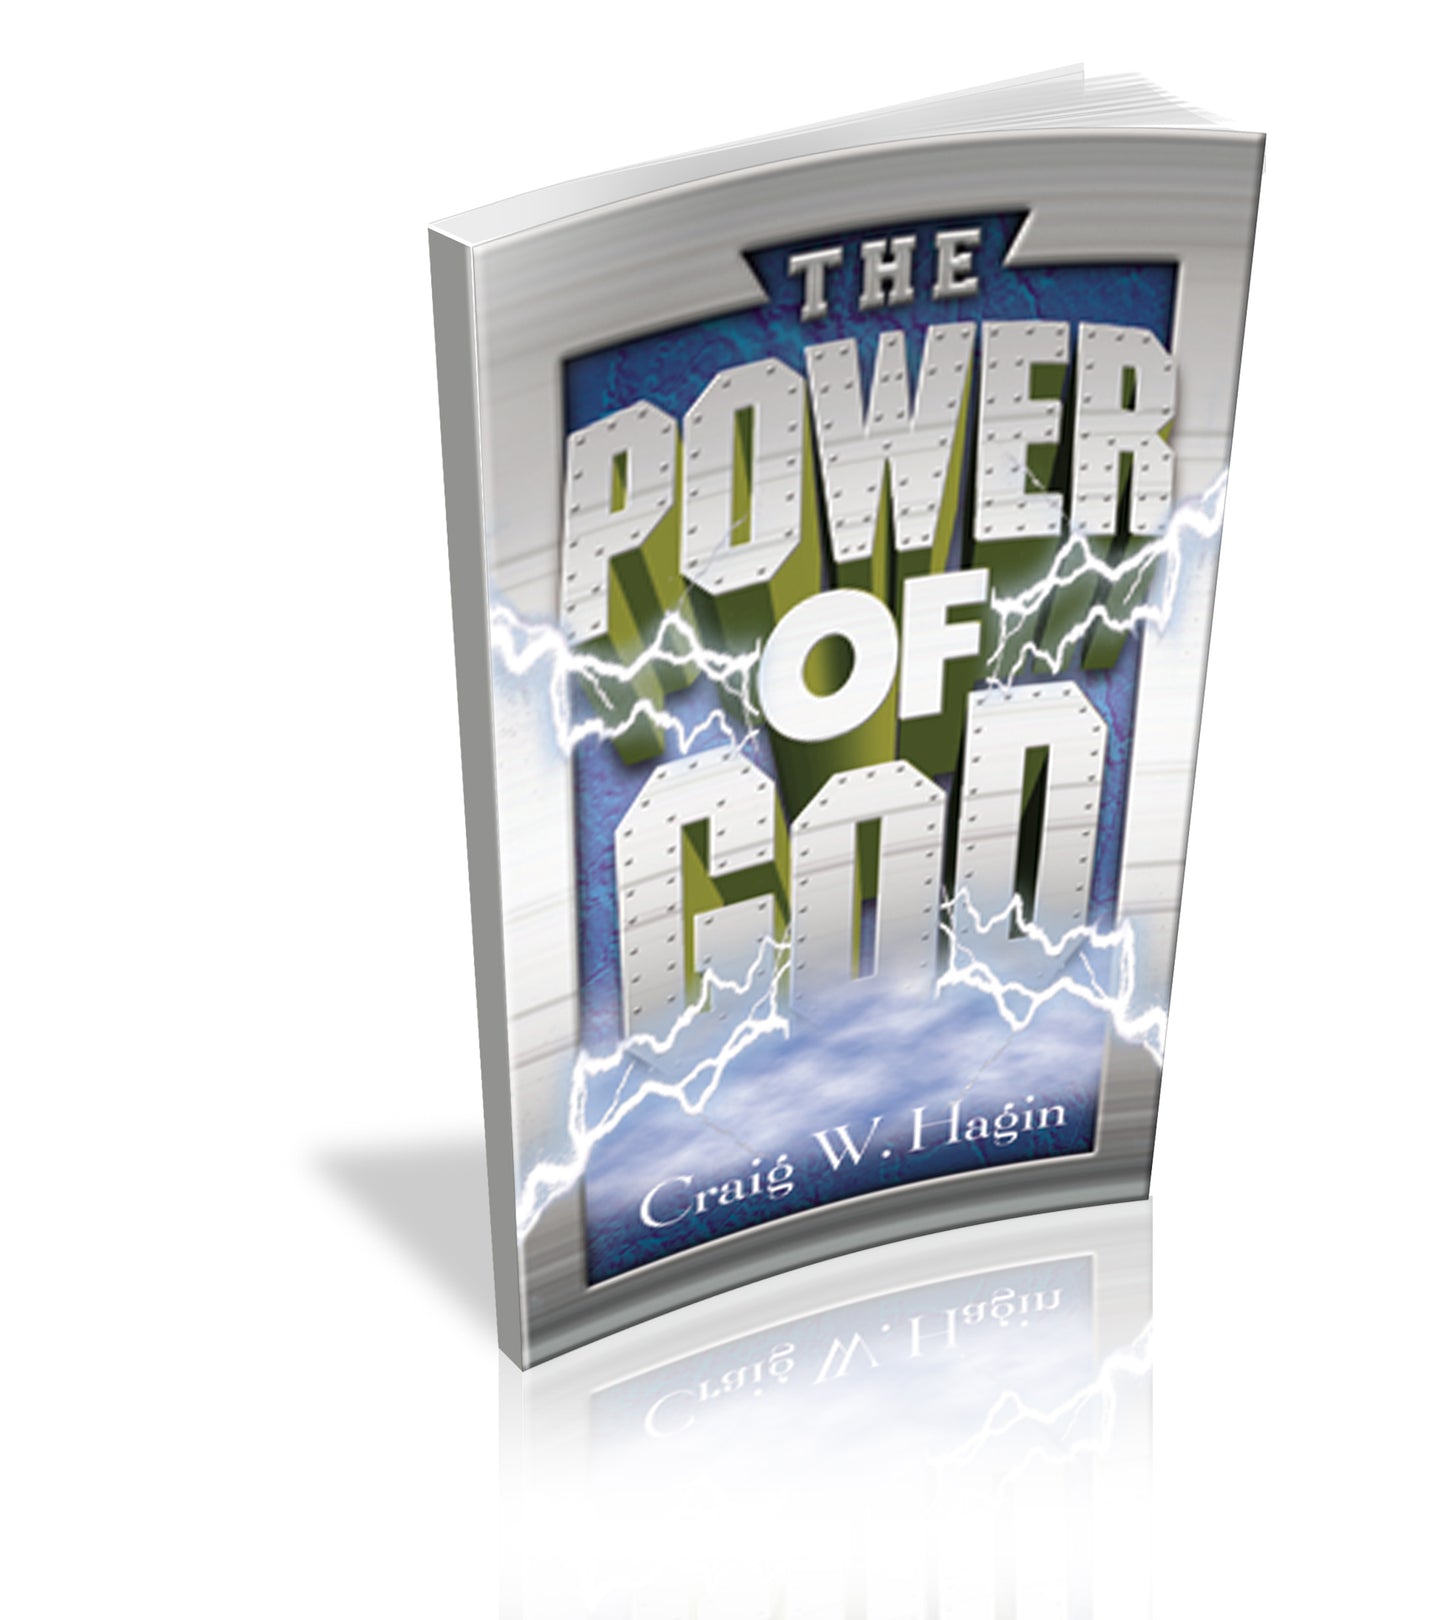 The Power of God